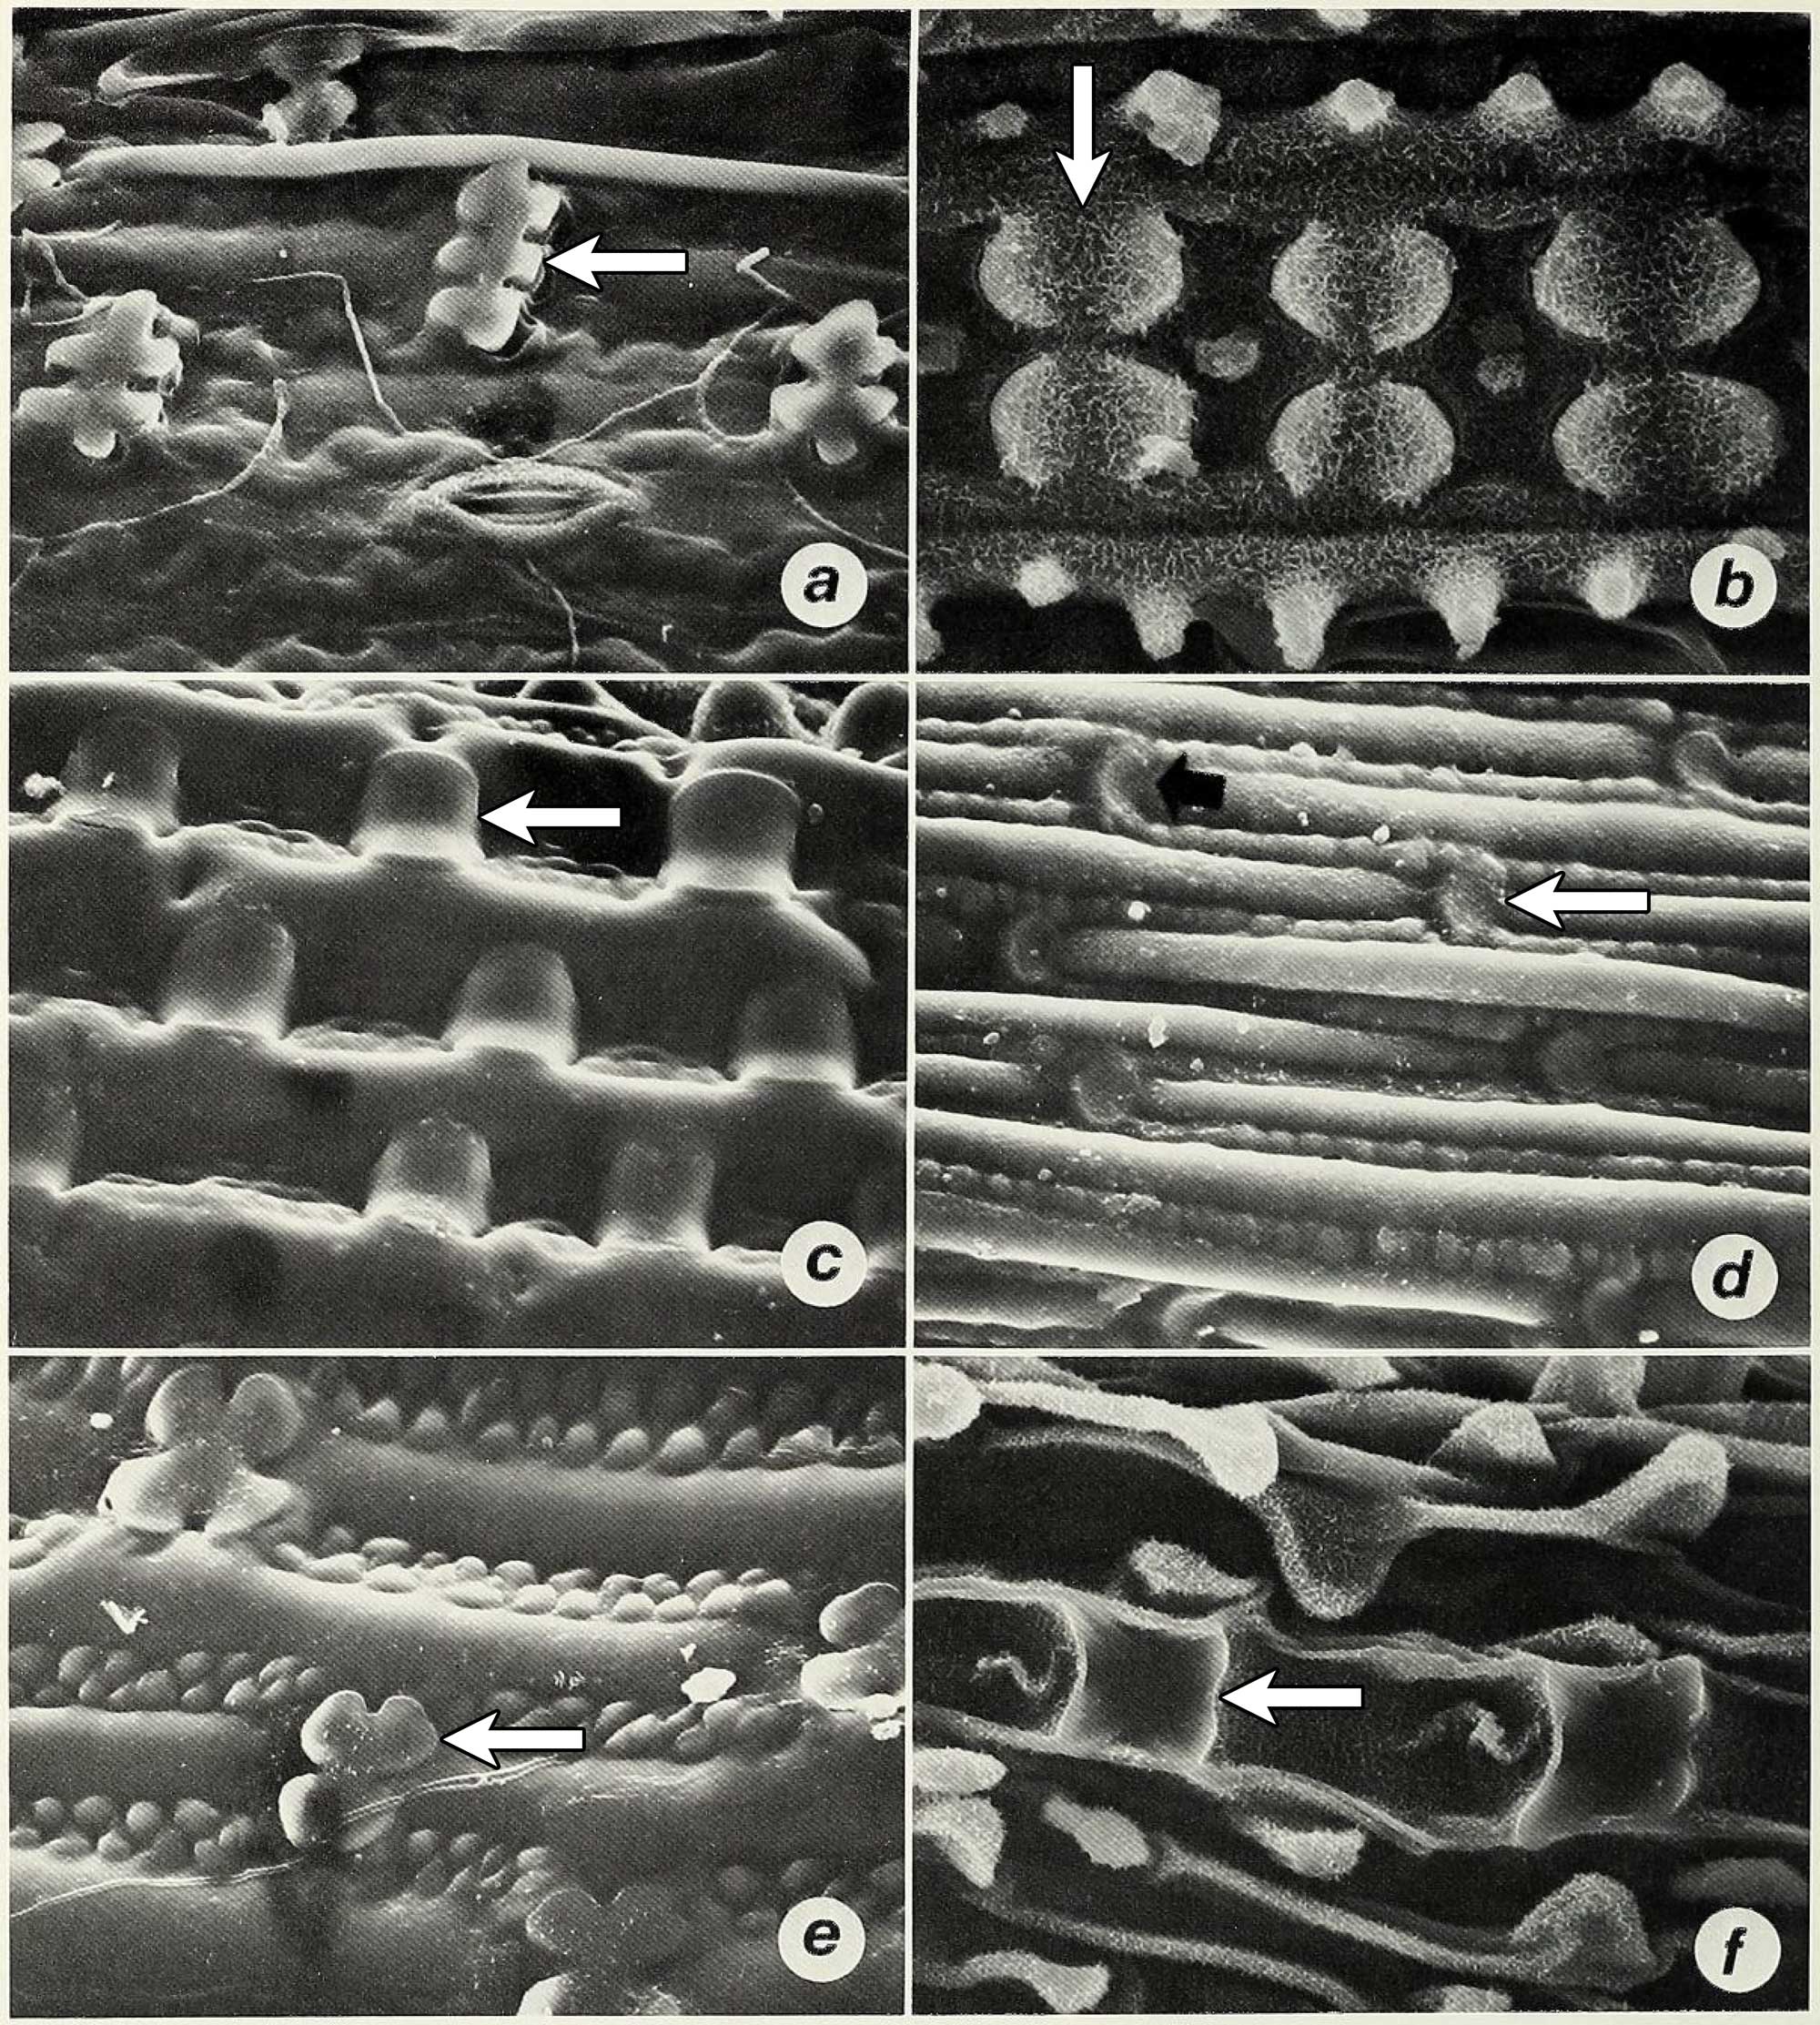 6-Panel figure showing black and white photographs of the epidermises of different grasses taken with a scanning electron microscope, which provide high-magnification images of surface textures. Each photo shows a different silica body morphology. Panels are read left to right, top to bottom. Panel 1. Crenate-vertical type silica bodies in carycillo, a bamboo. Panel 2. Figure-eight-shaped silica bodies in African wild rice. Panel 3. Saddle-shaped silica bodies in Chrysochloa hindsii. Panel 4. Crescent-shaped silica bodies in Mediterranean needlegrass. Panel 5. Cross-shaped silica bodies in Phacelurus huillensis. Panel 6. Acutely-angled (nearly square) silica bodies in Heteranthoecia guineensis.  